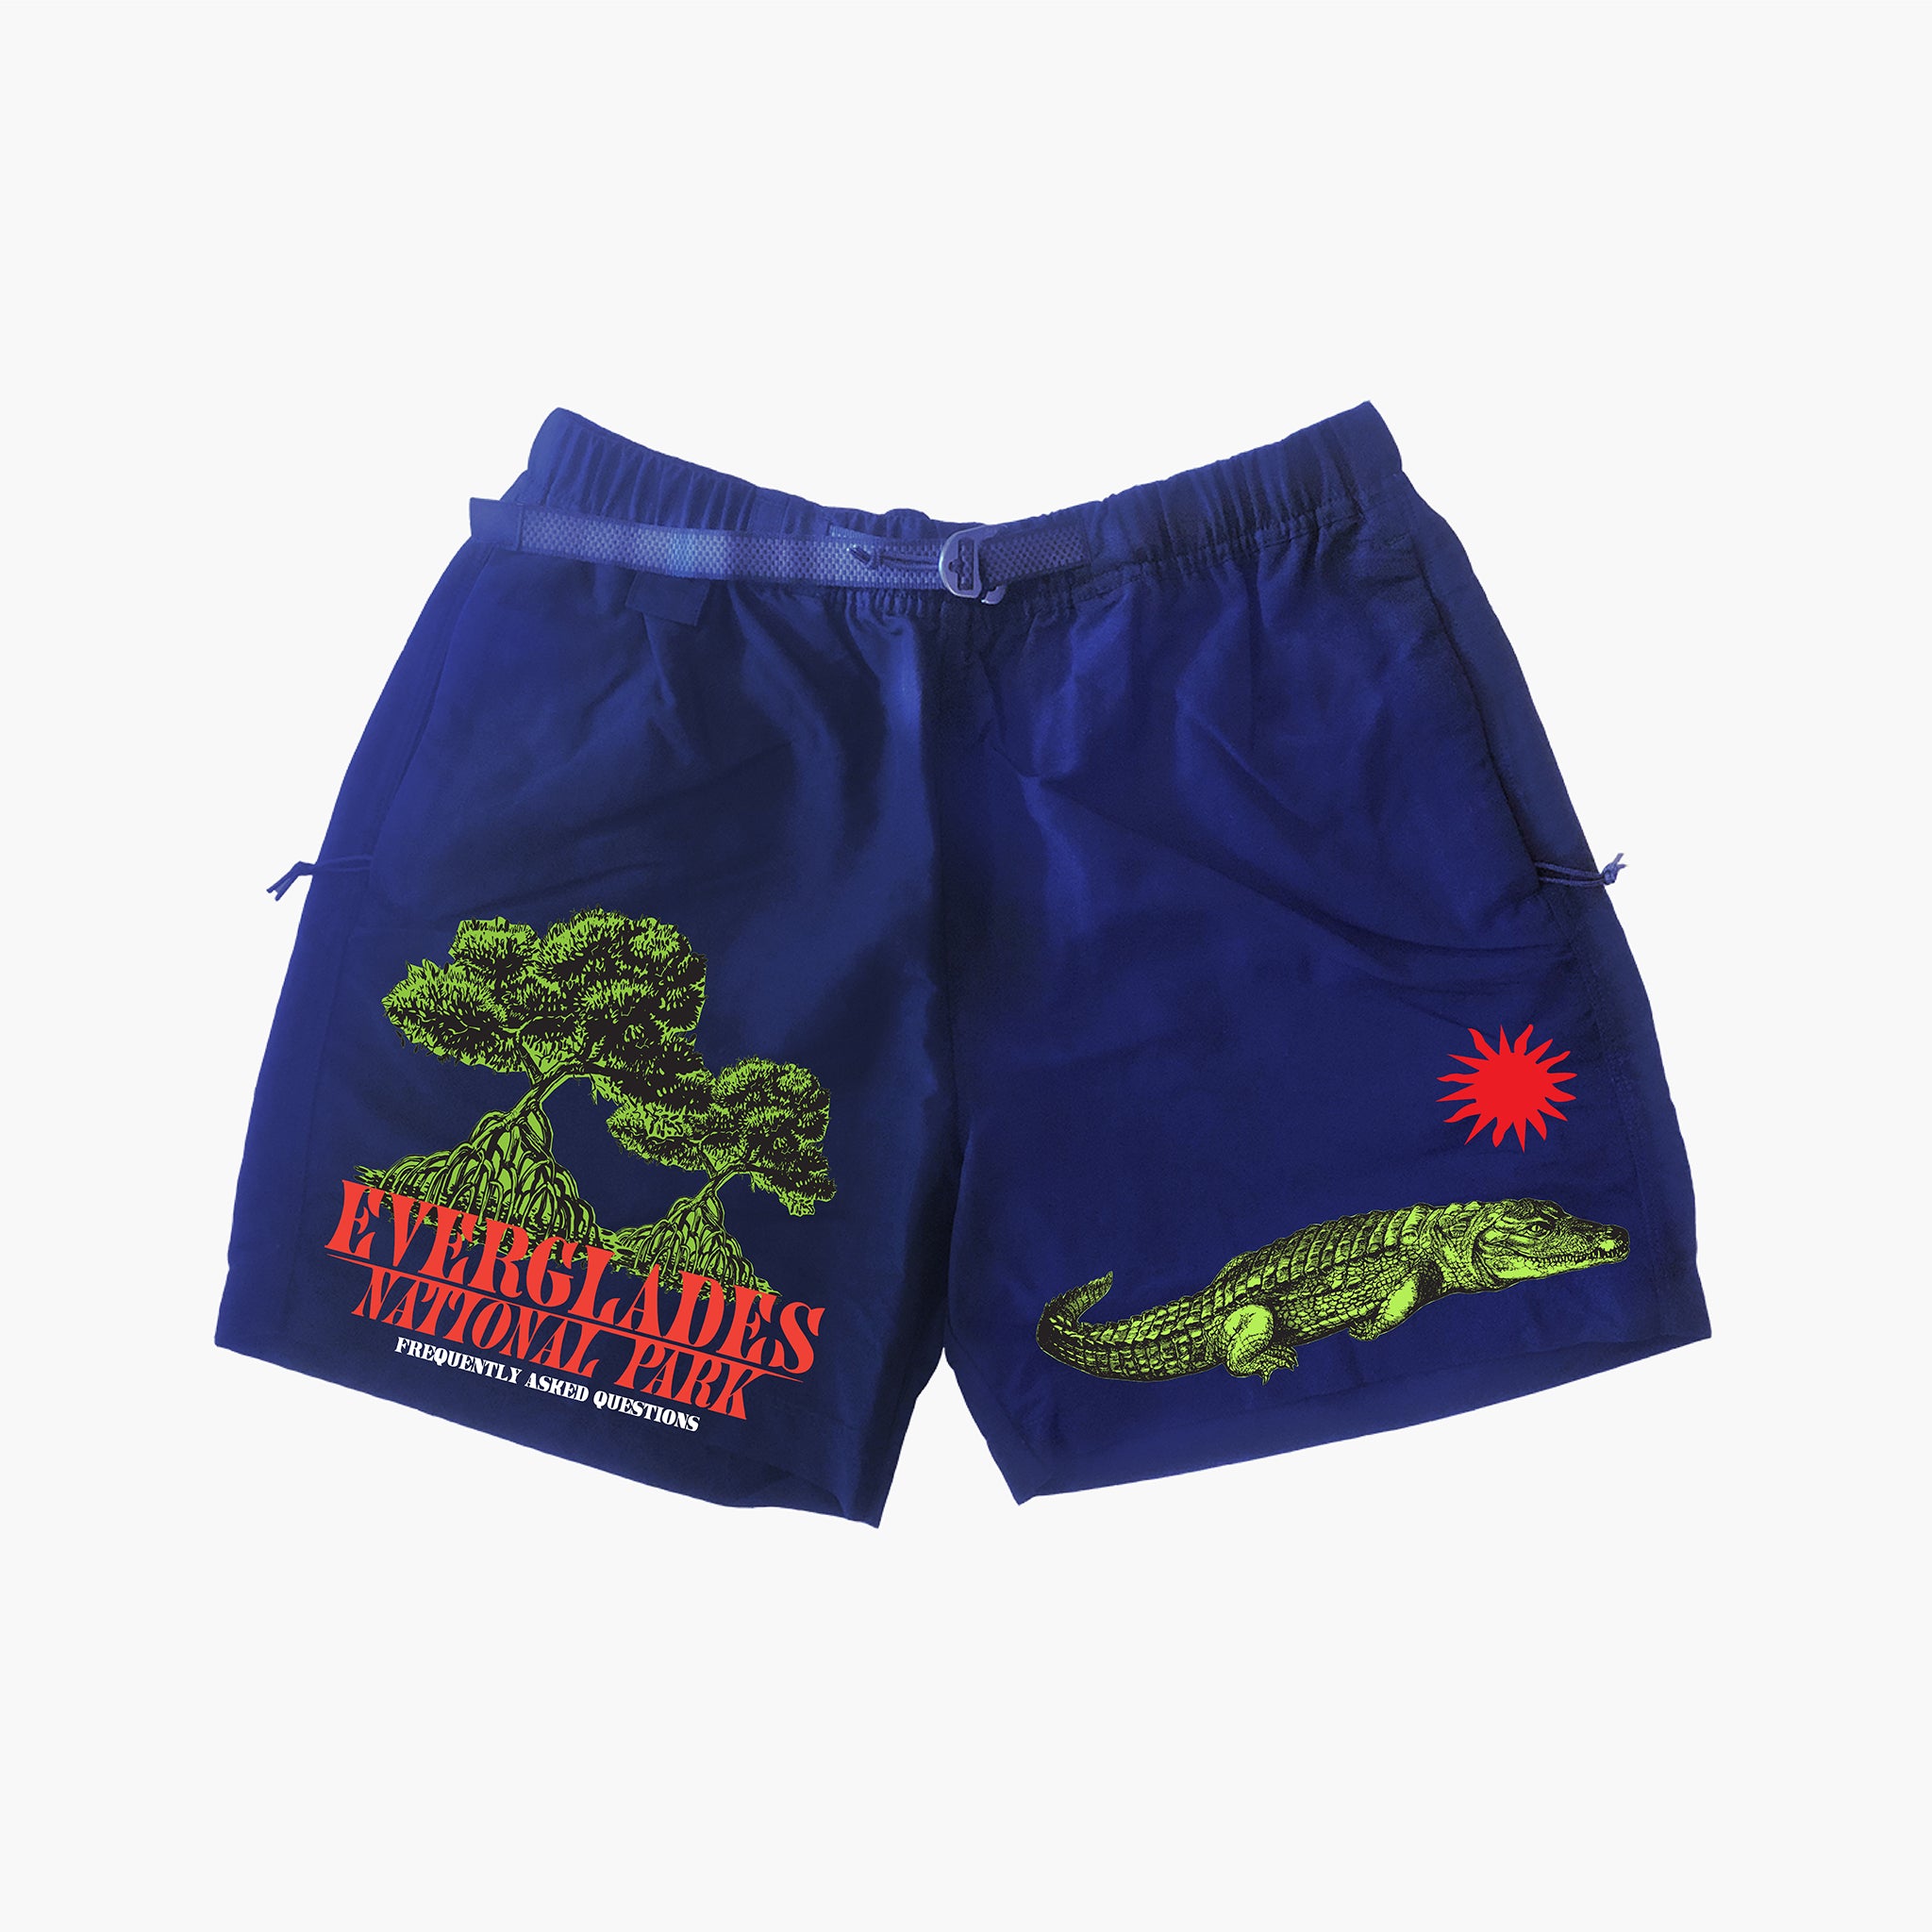 Everglades Nylon Shorts - Frequently Asked Questions